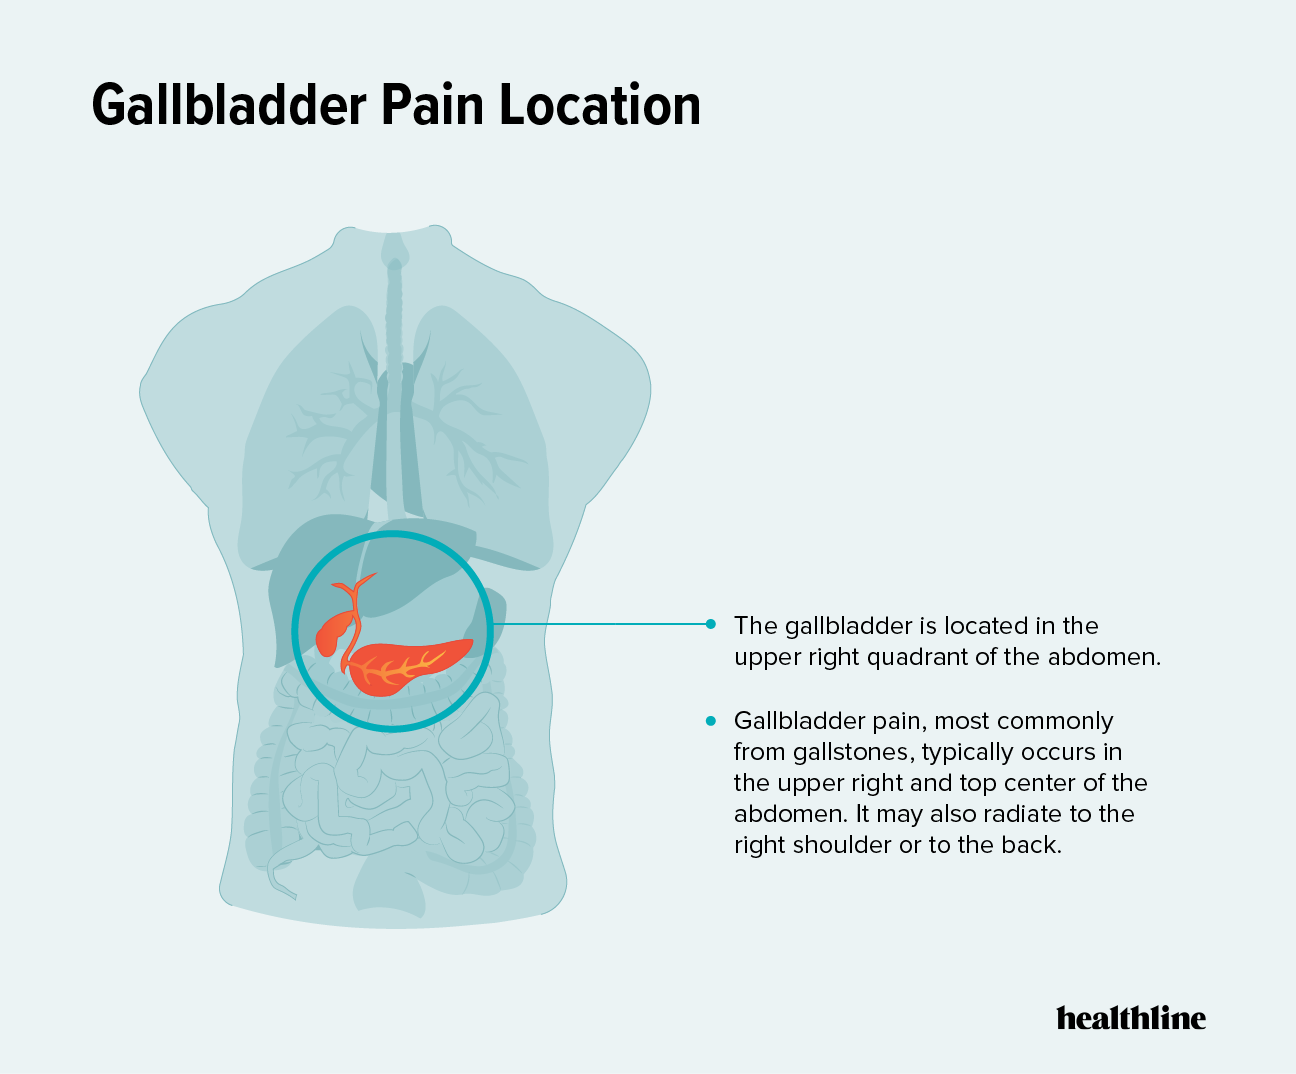 Can gallbladder pain be on lower right side?